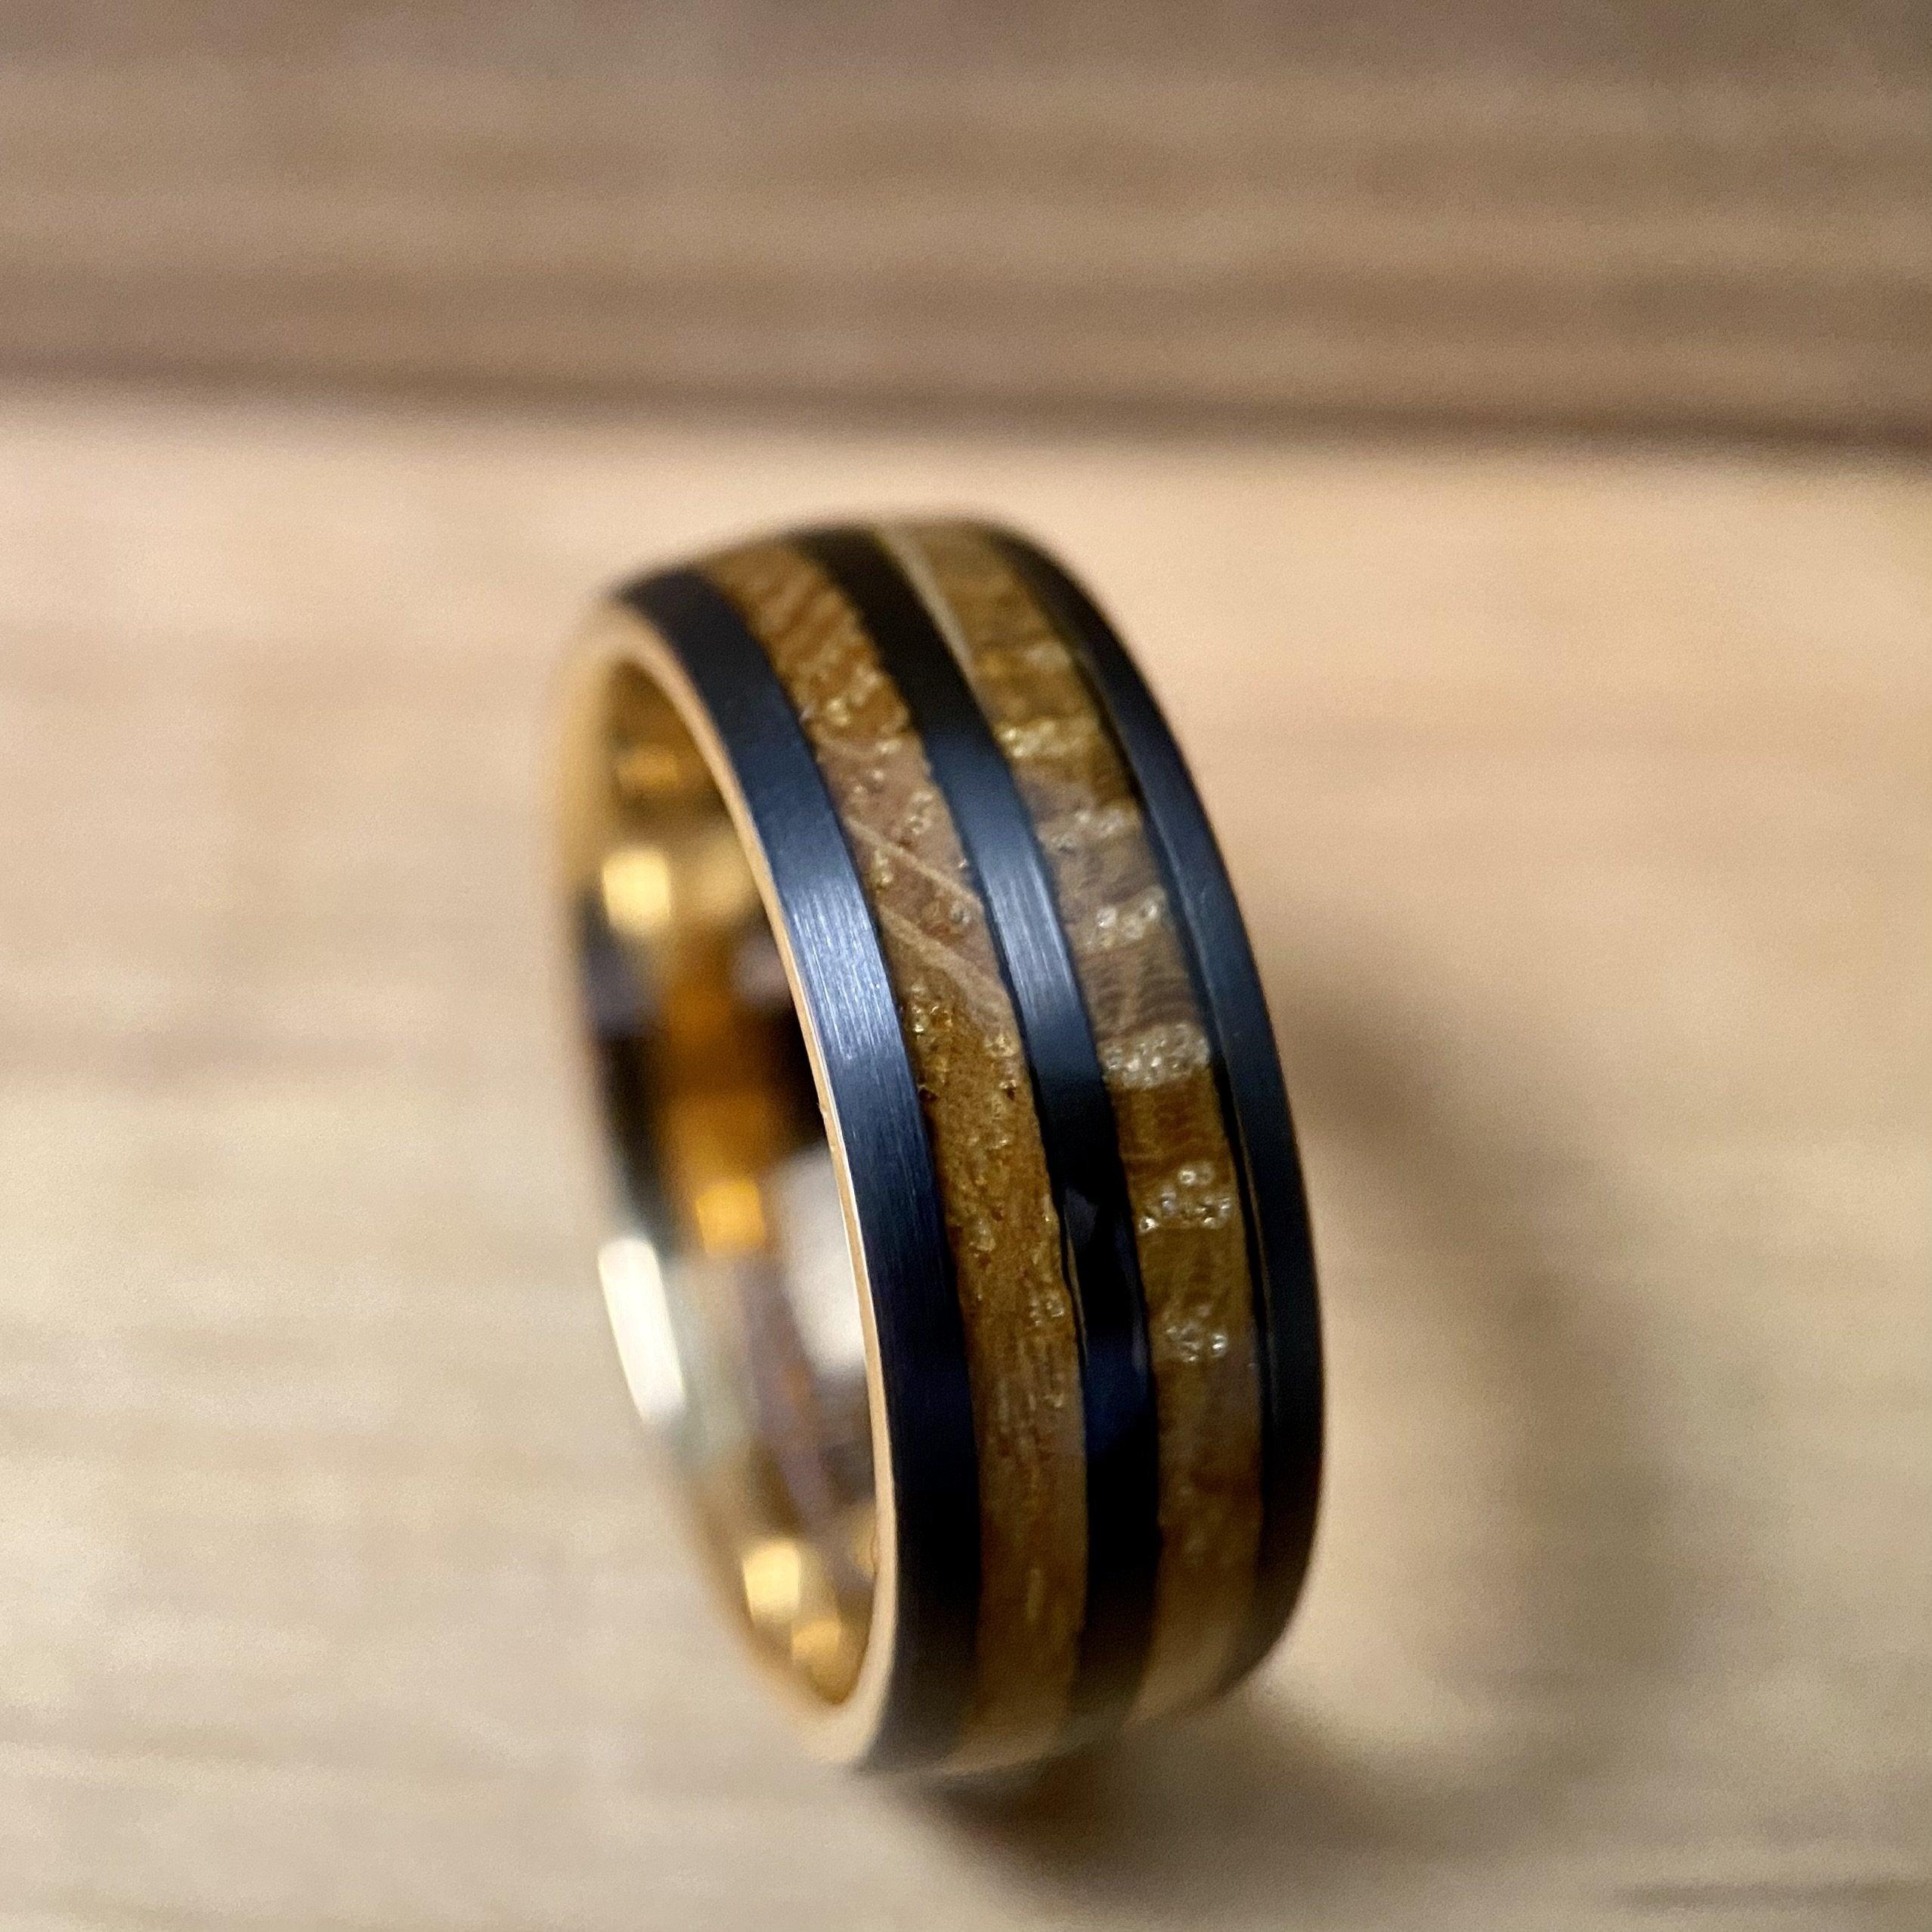 BW James Jewelers ALT Wedding Band “The Whiskey” Tungsten Ring With Reclaimed Bourbon Whiskey Barrel Wood And Rose Gold Color